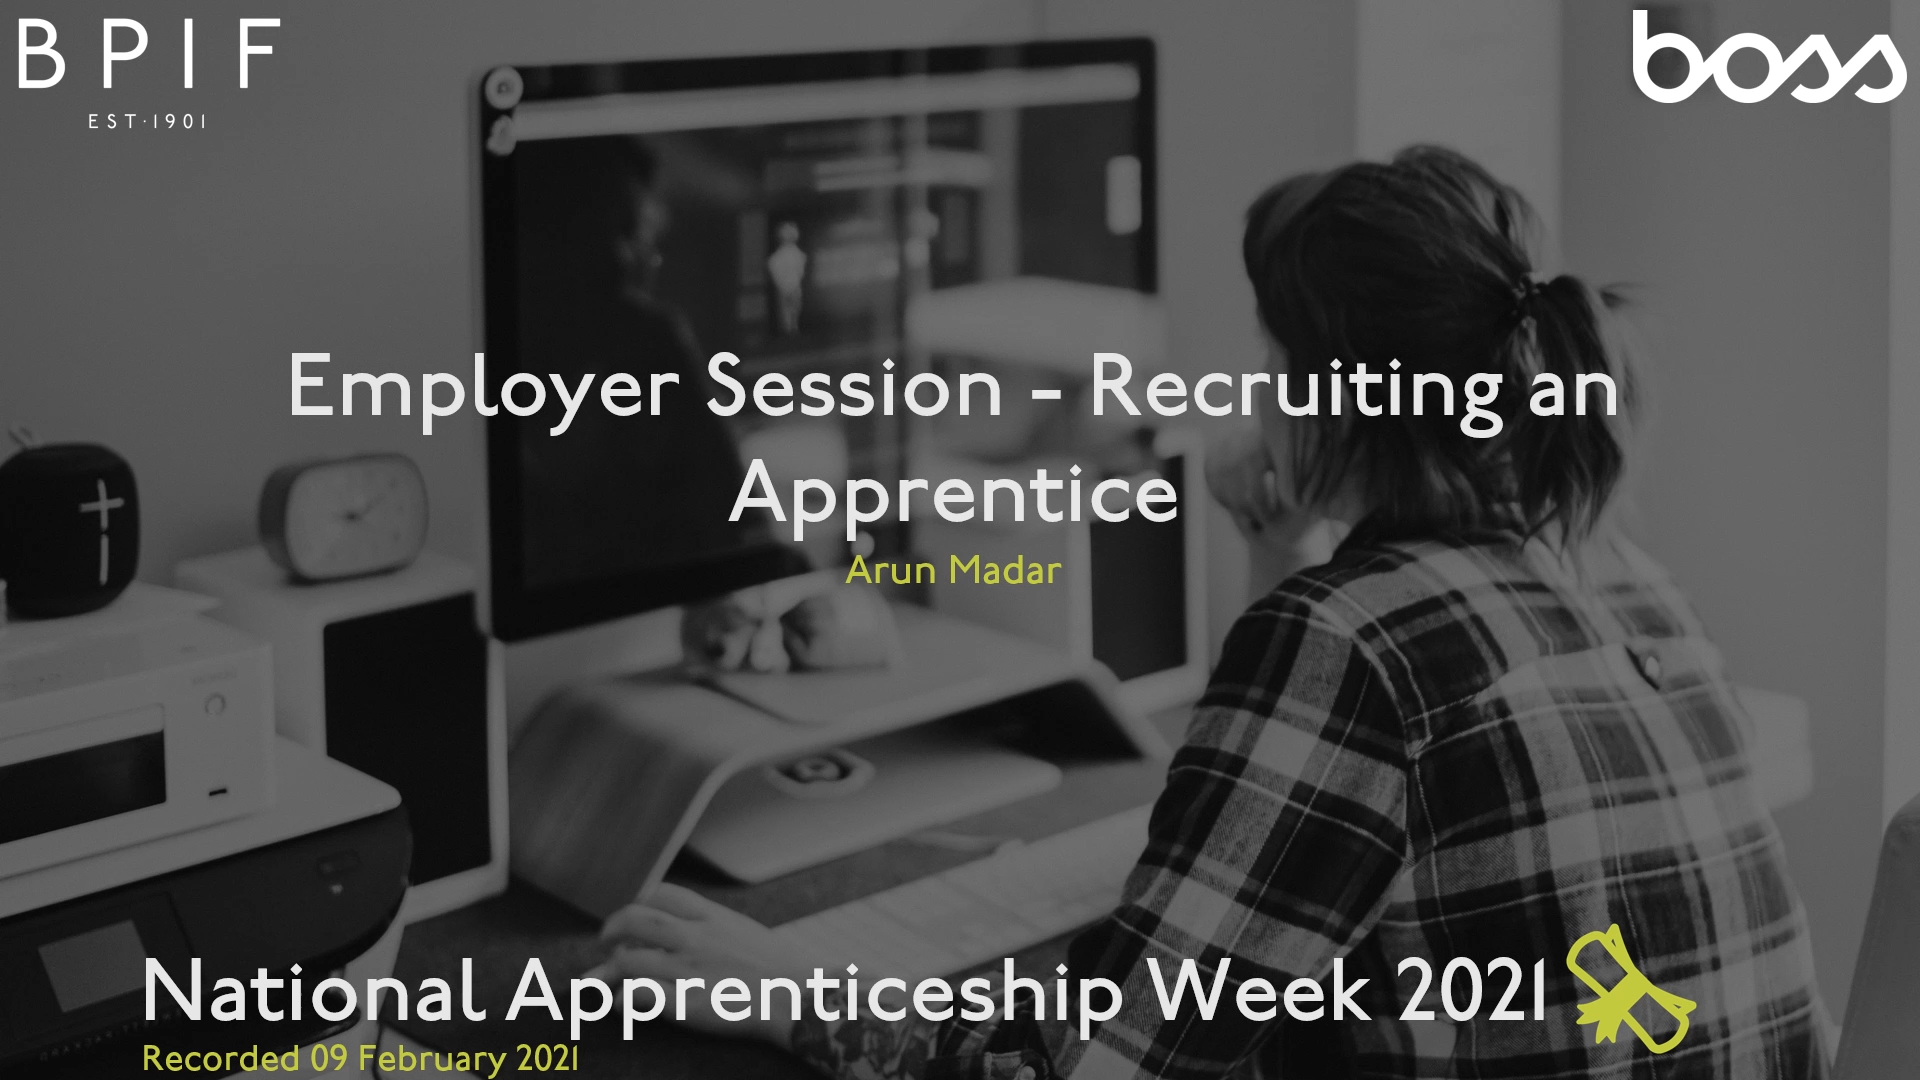 Employer Session - Recruiting an Apprentice